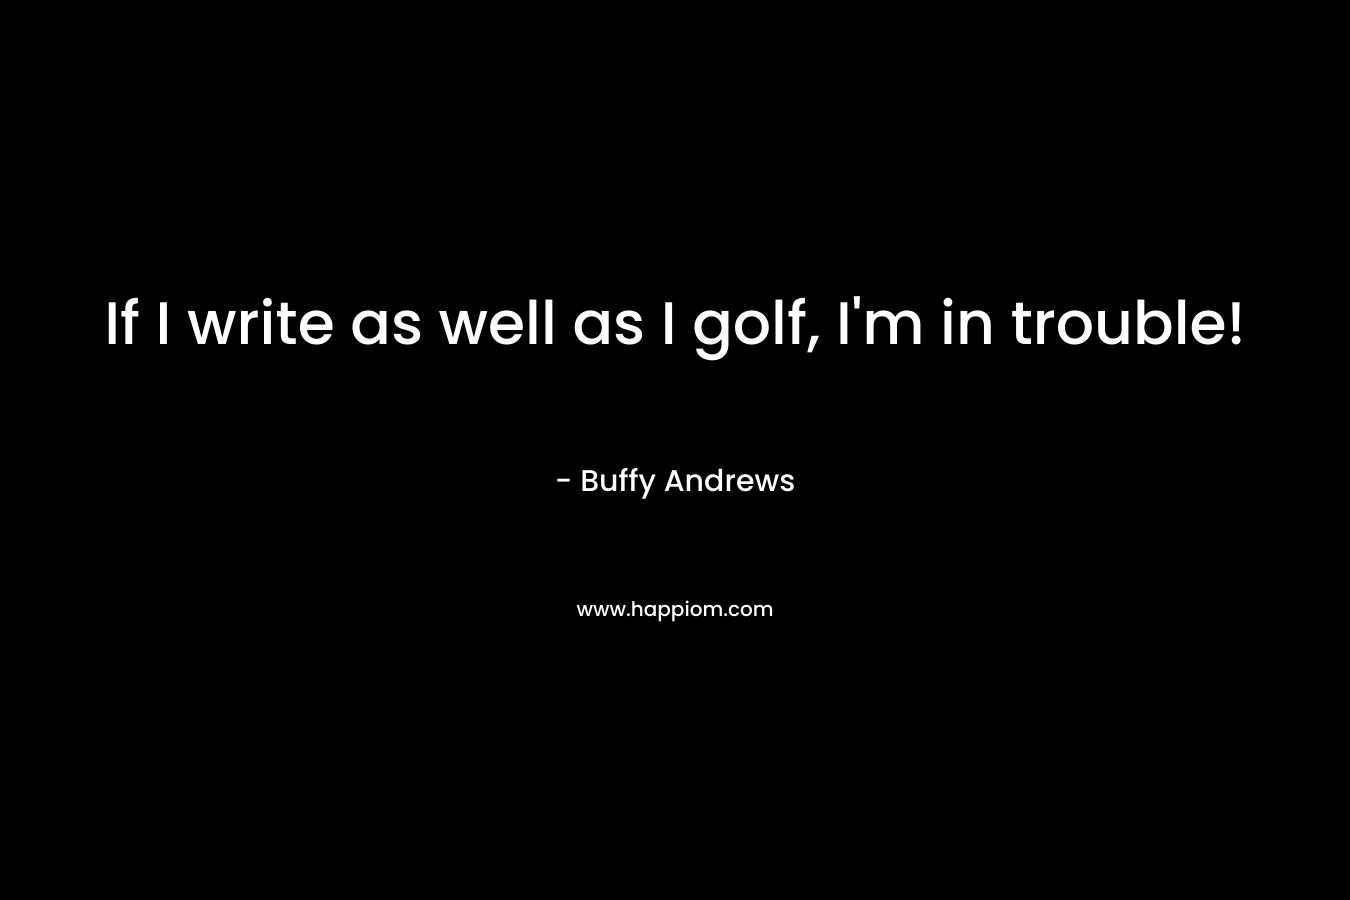 If I write as well as I golf, I’m in trouble! – Buffy Andrews